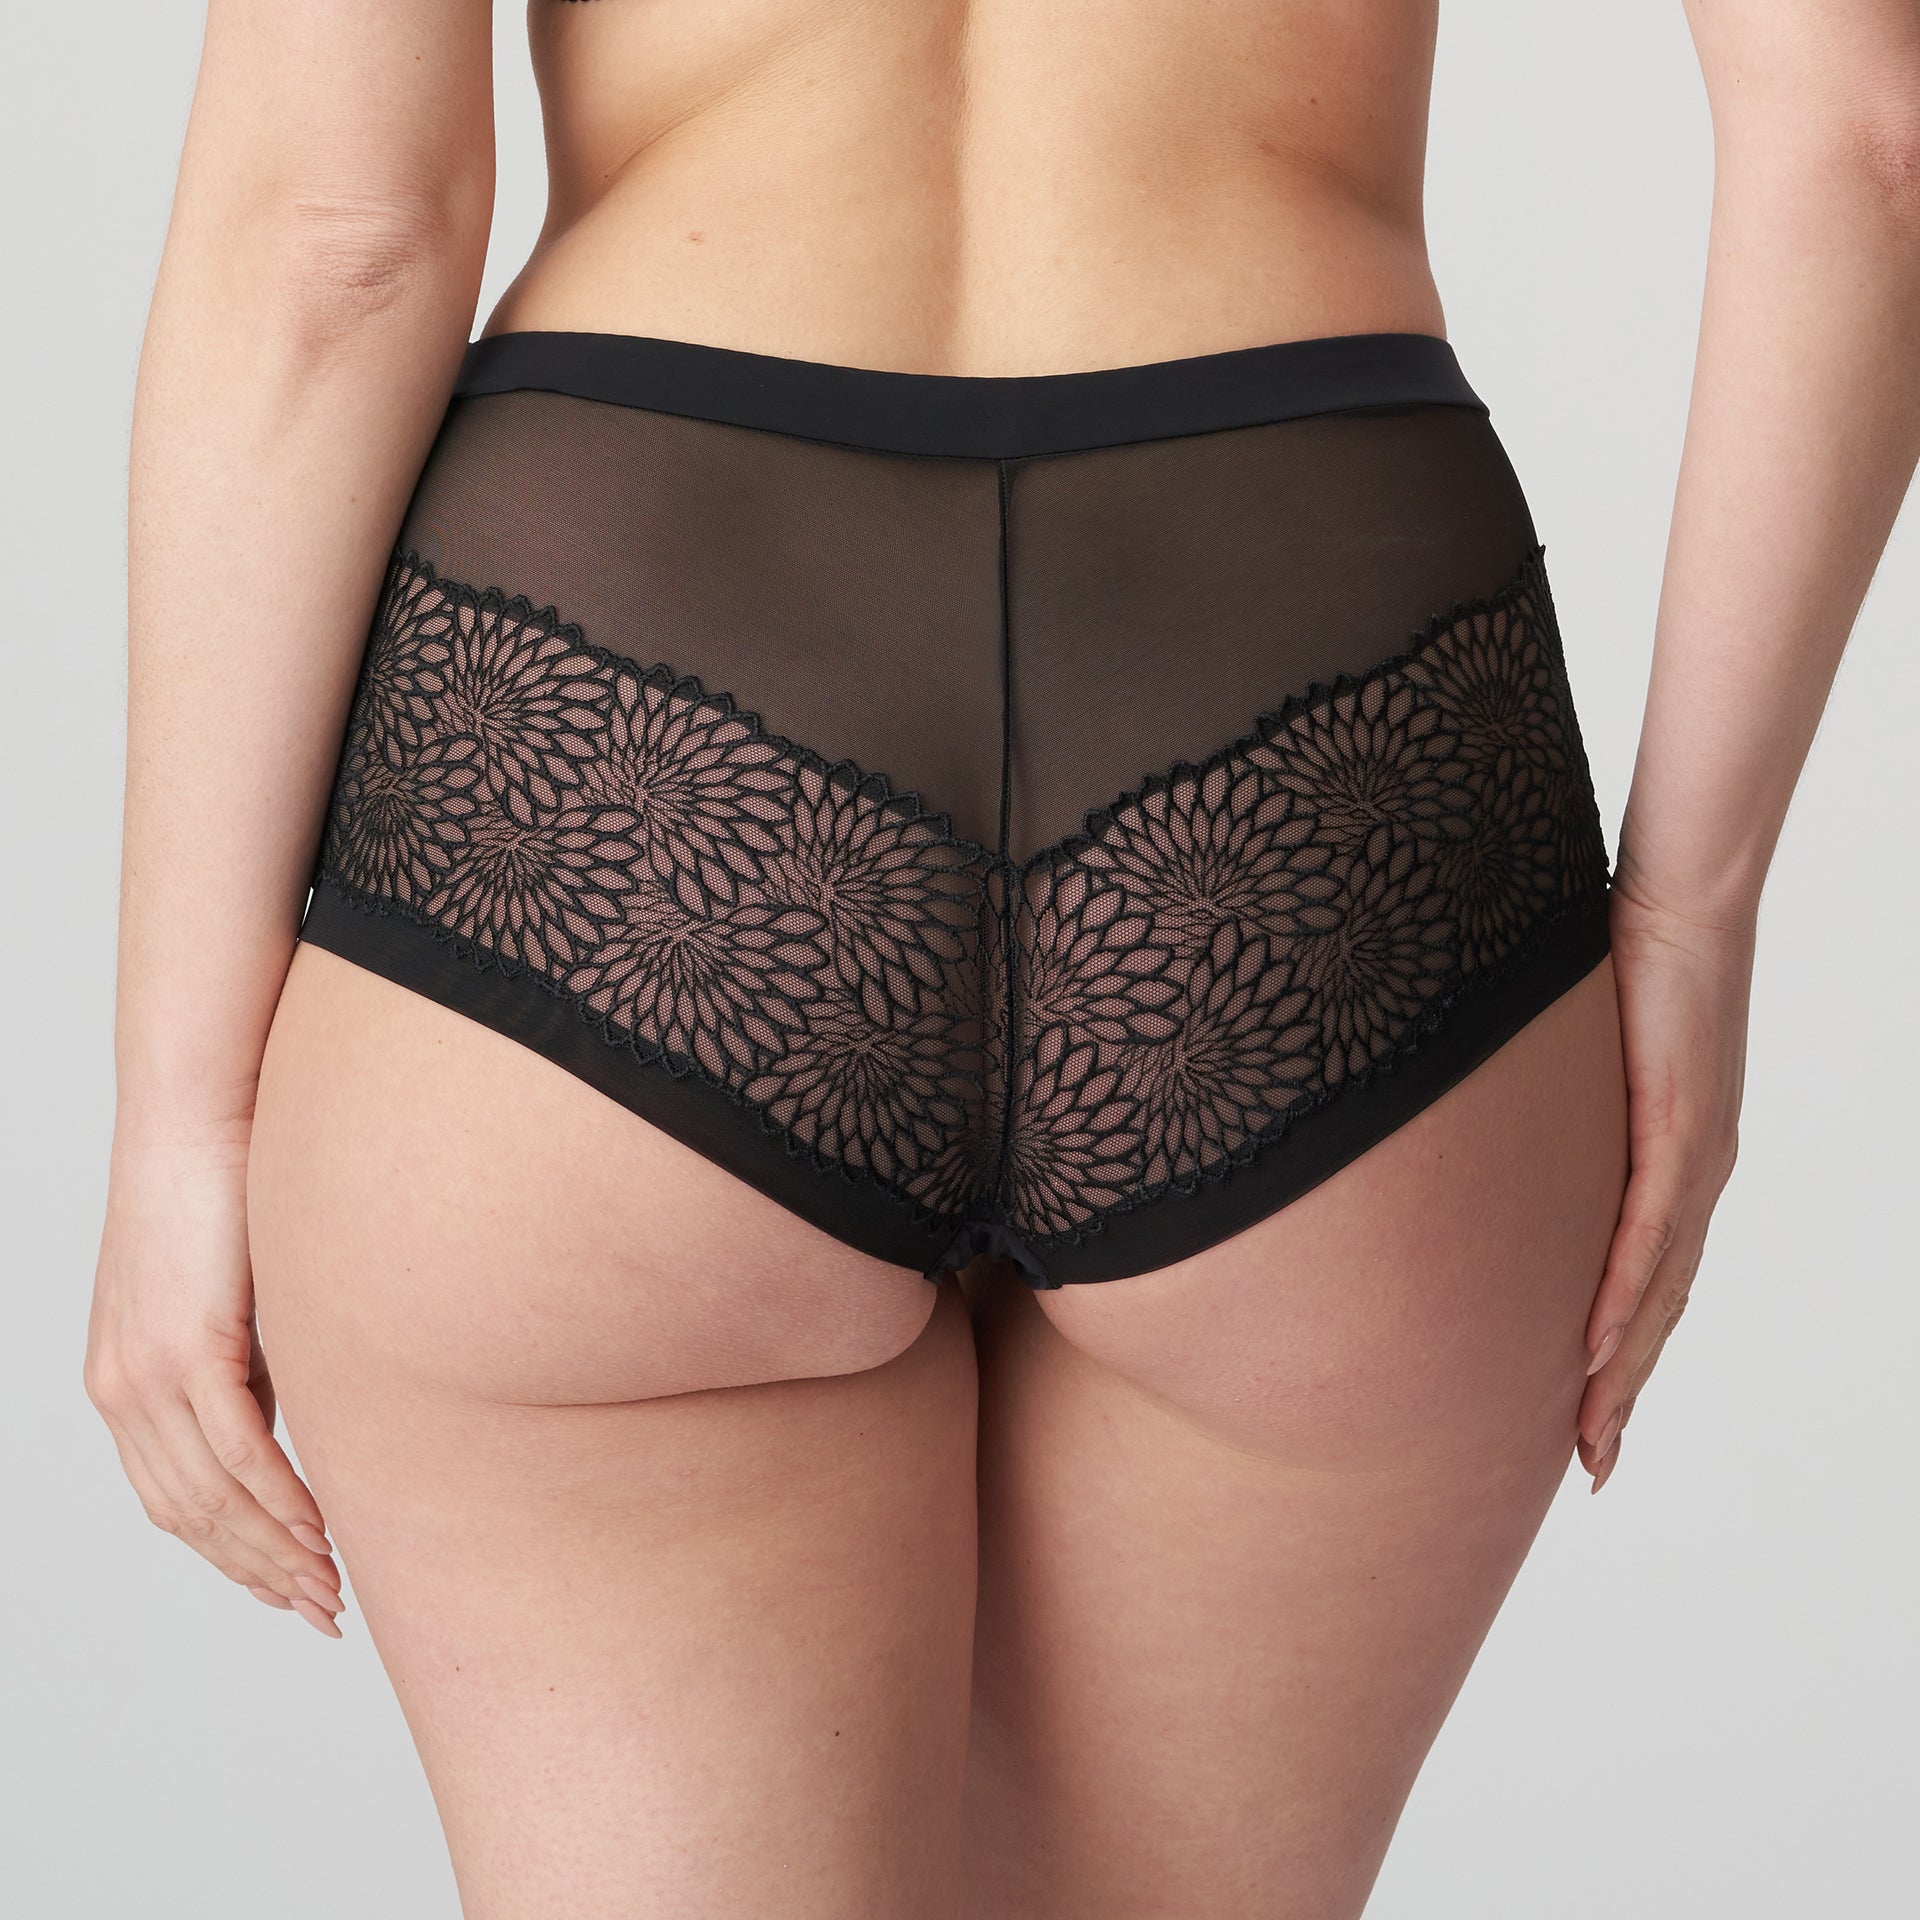 Back view of a woman wearing the Sophora high-waisted cheeky panty in Black by PrimaDonna.